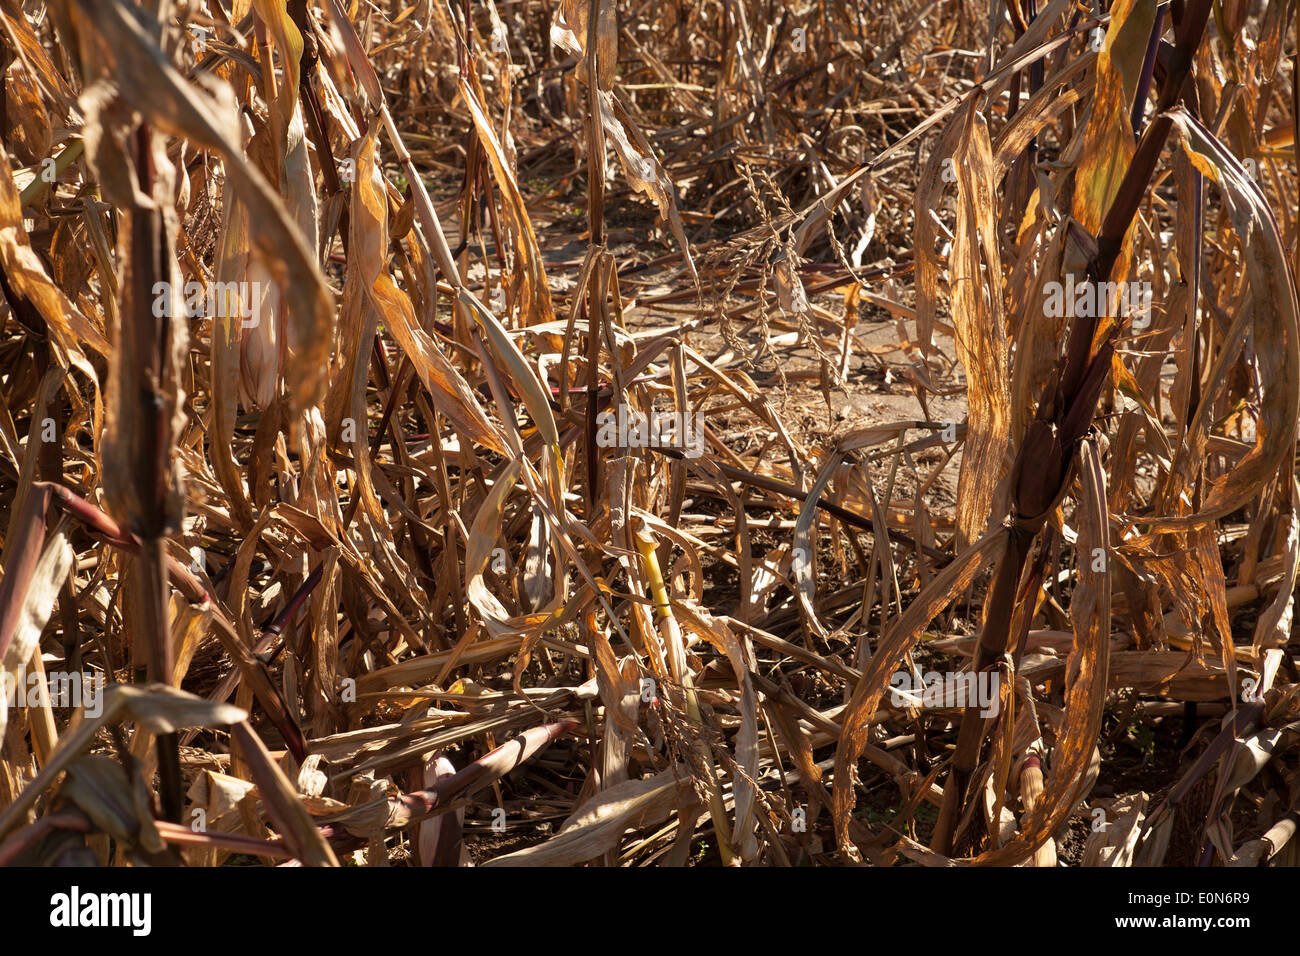 Corn stalks in a Halloween maze stand in the sun in the low afternoon sun. Stock Photo